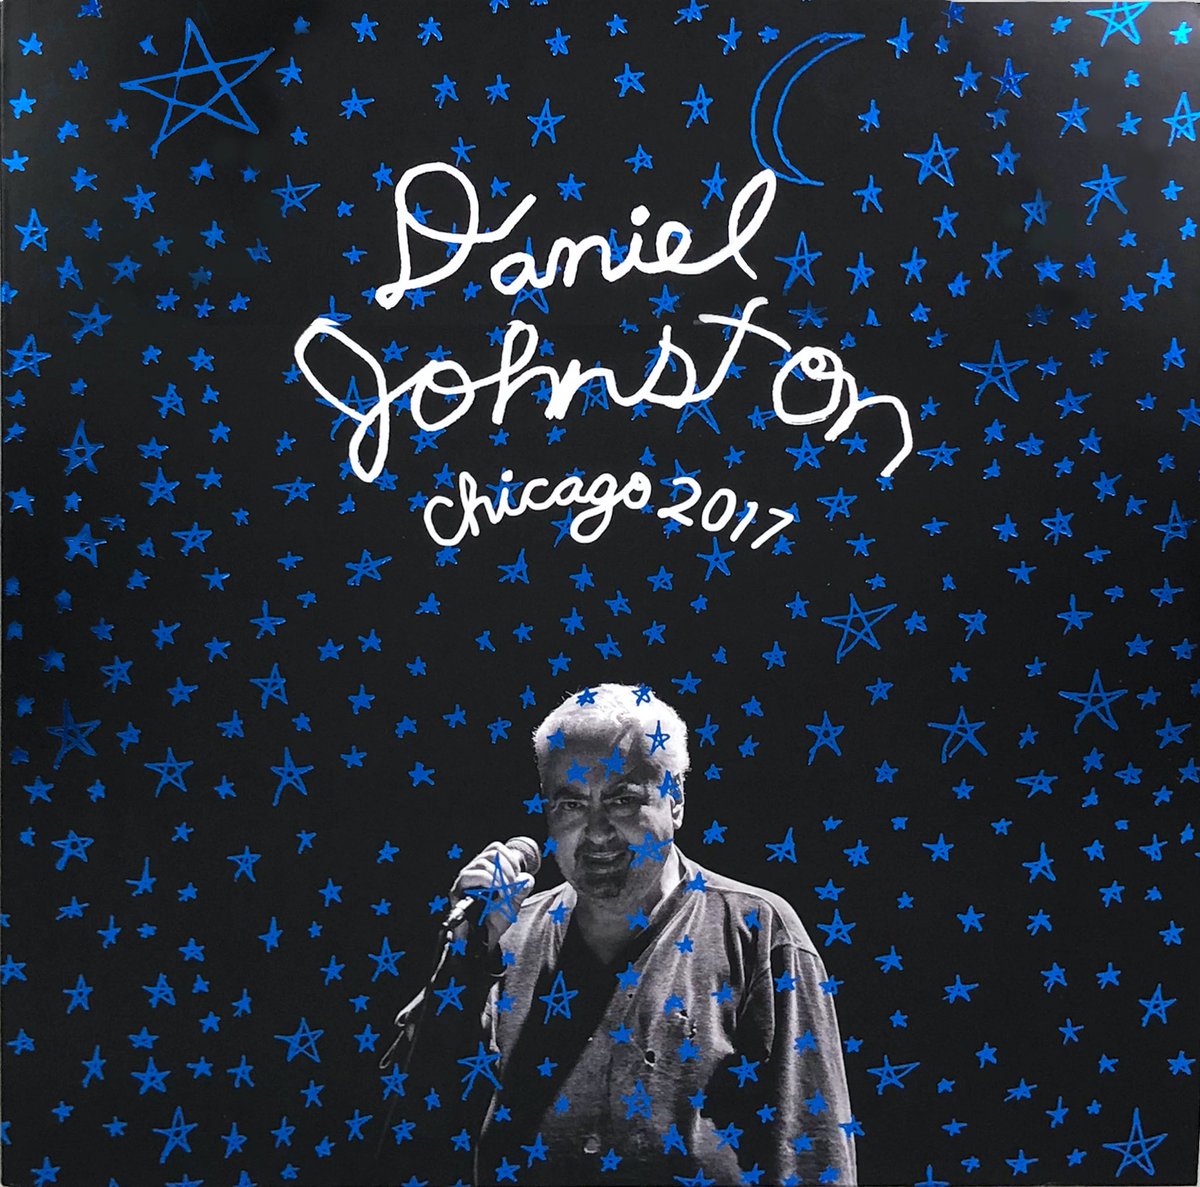 #MúsicaDesobediente Chicago 2017 @danieljohnston 2020 #Americana #Pop 🇺🇸
Recorded live in a couple of sessions led by @JeffTweedy with his son @spencertweedy, this is an emotional statement that transcends sounds through timeless melodies and touching performances 🖤